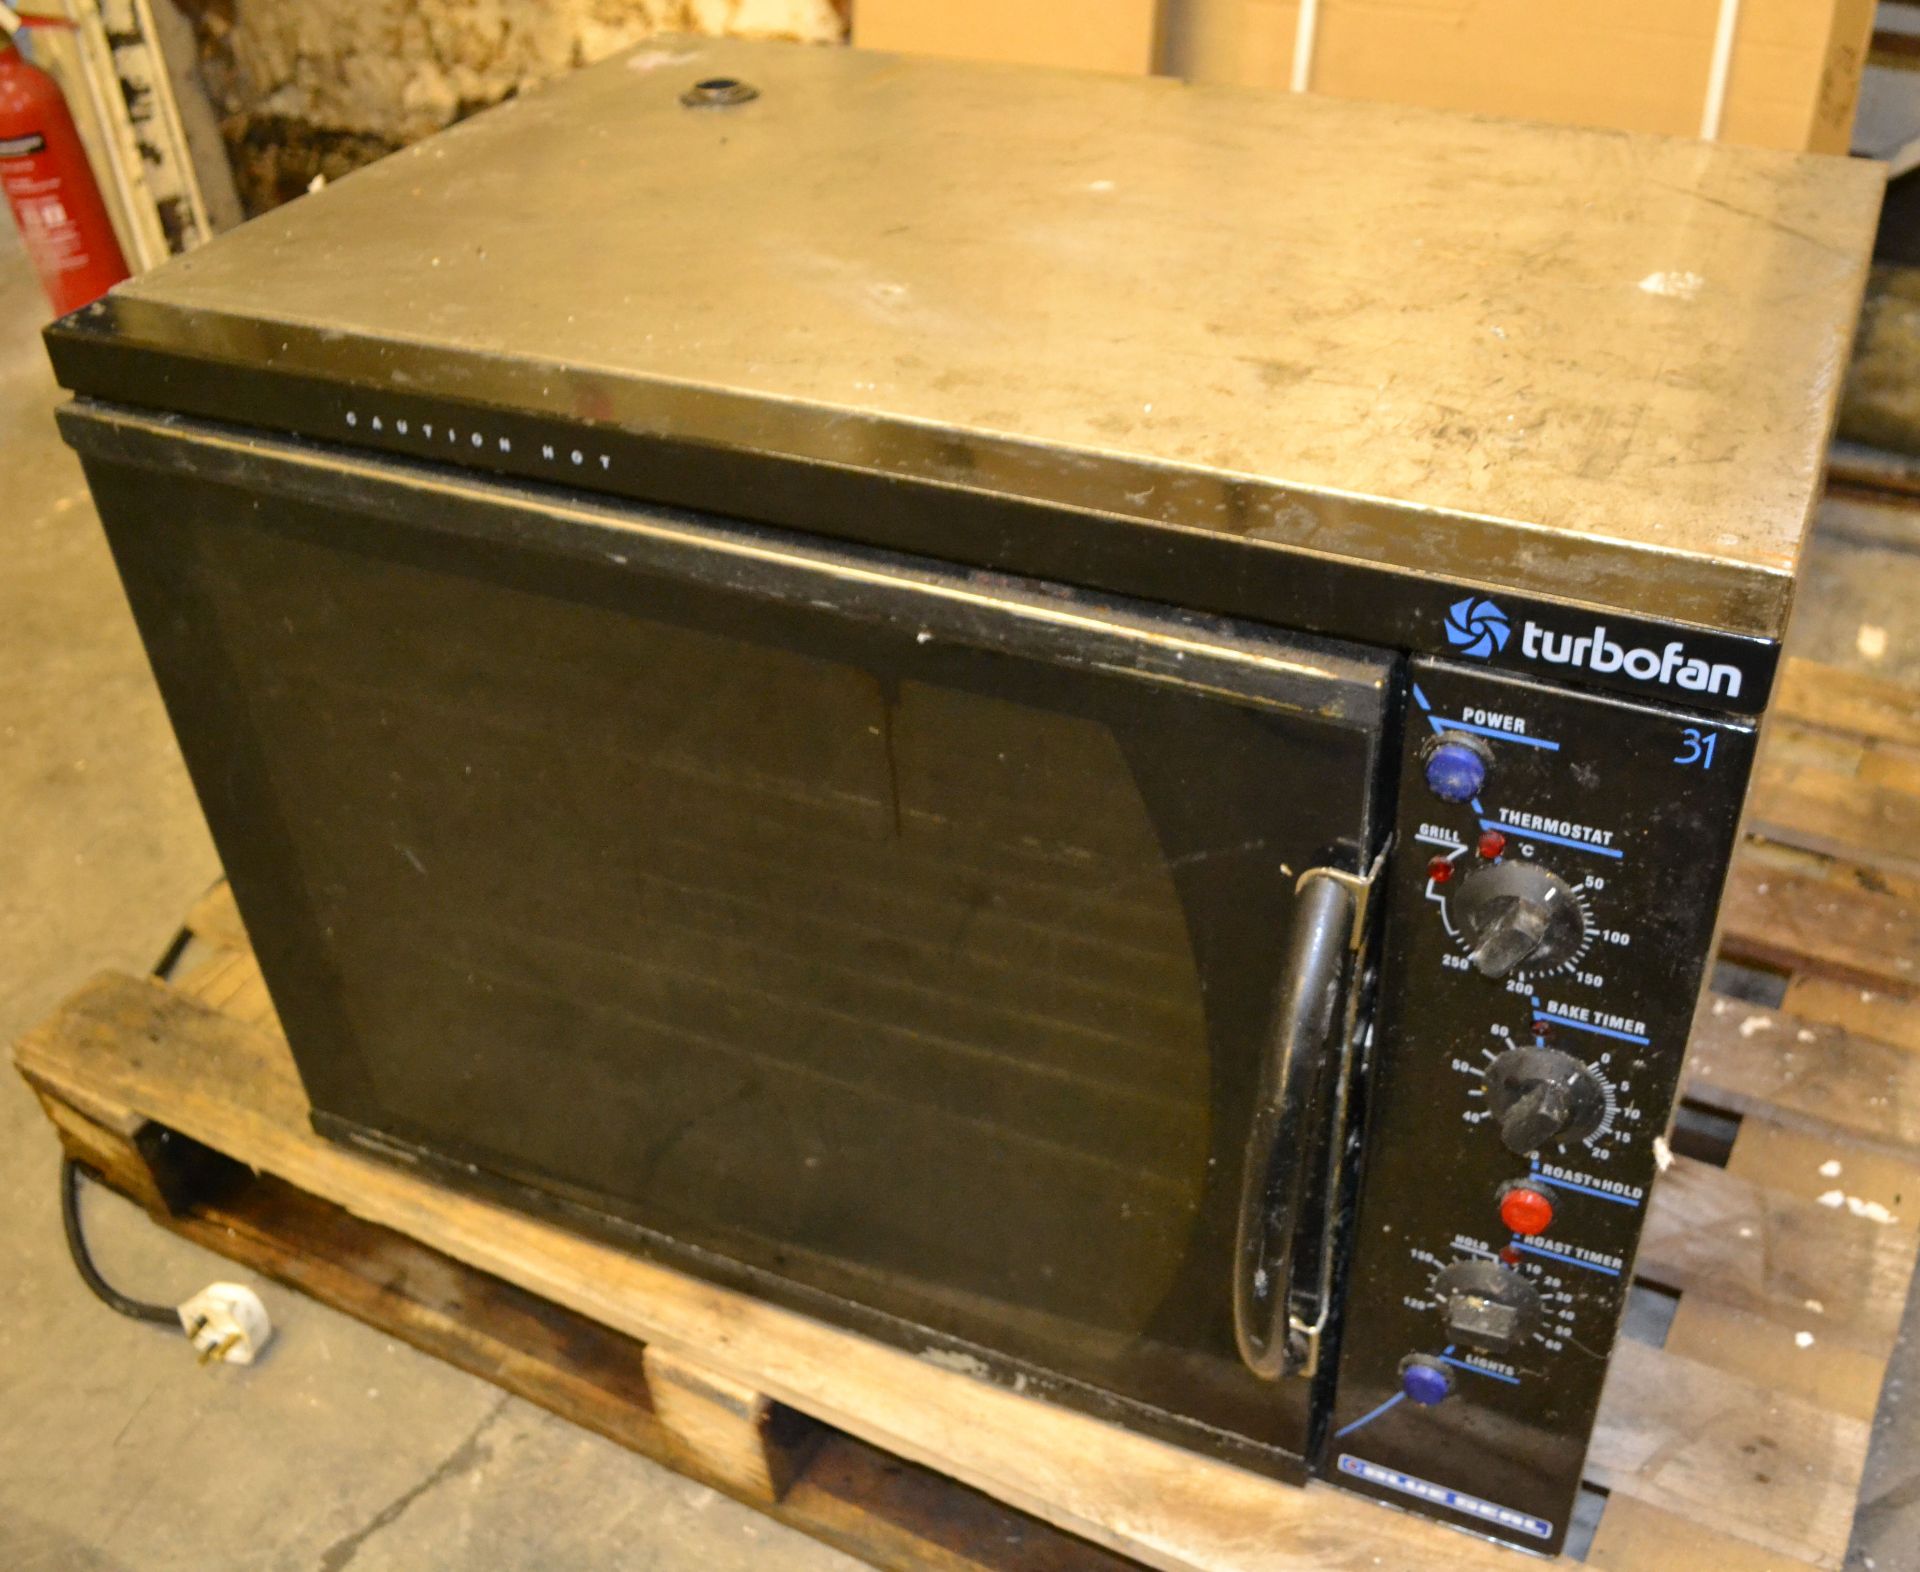 1 x Blue Seal E31 Turbofan Convection Oven - Ref: FJC012 - CL124 - Location: Bolton BL1 - Used - Image 2 of 7